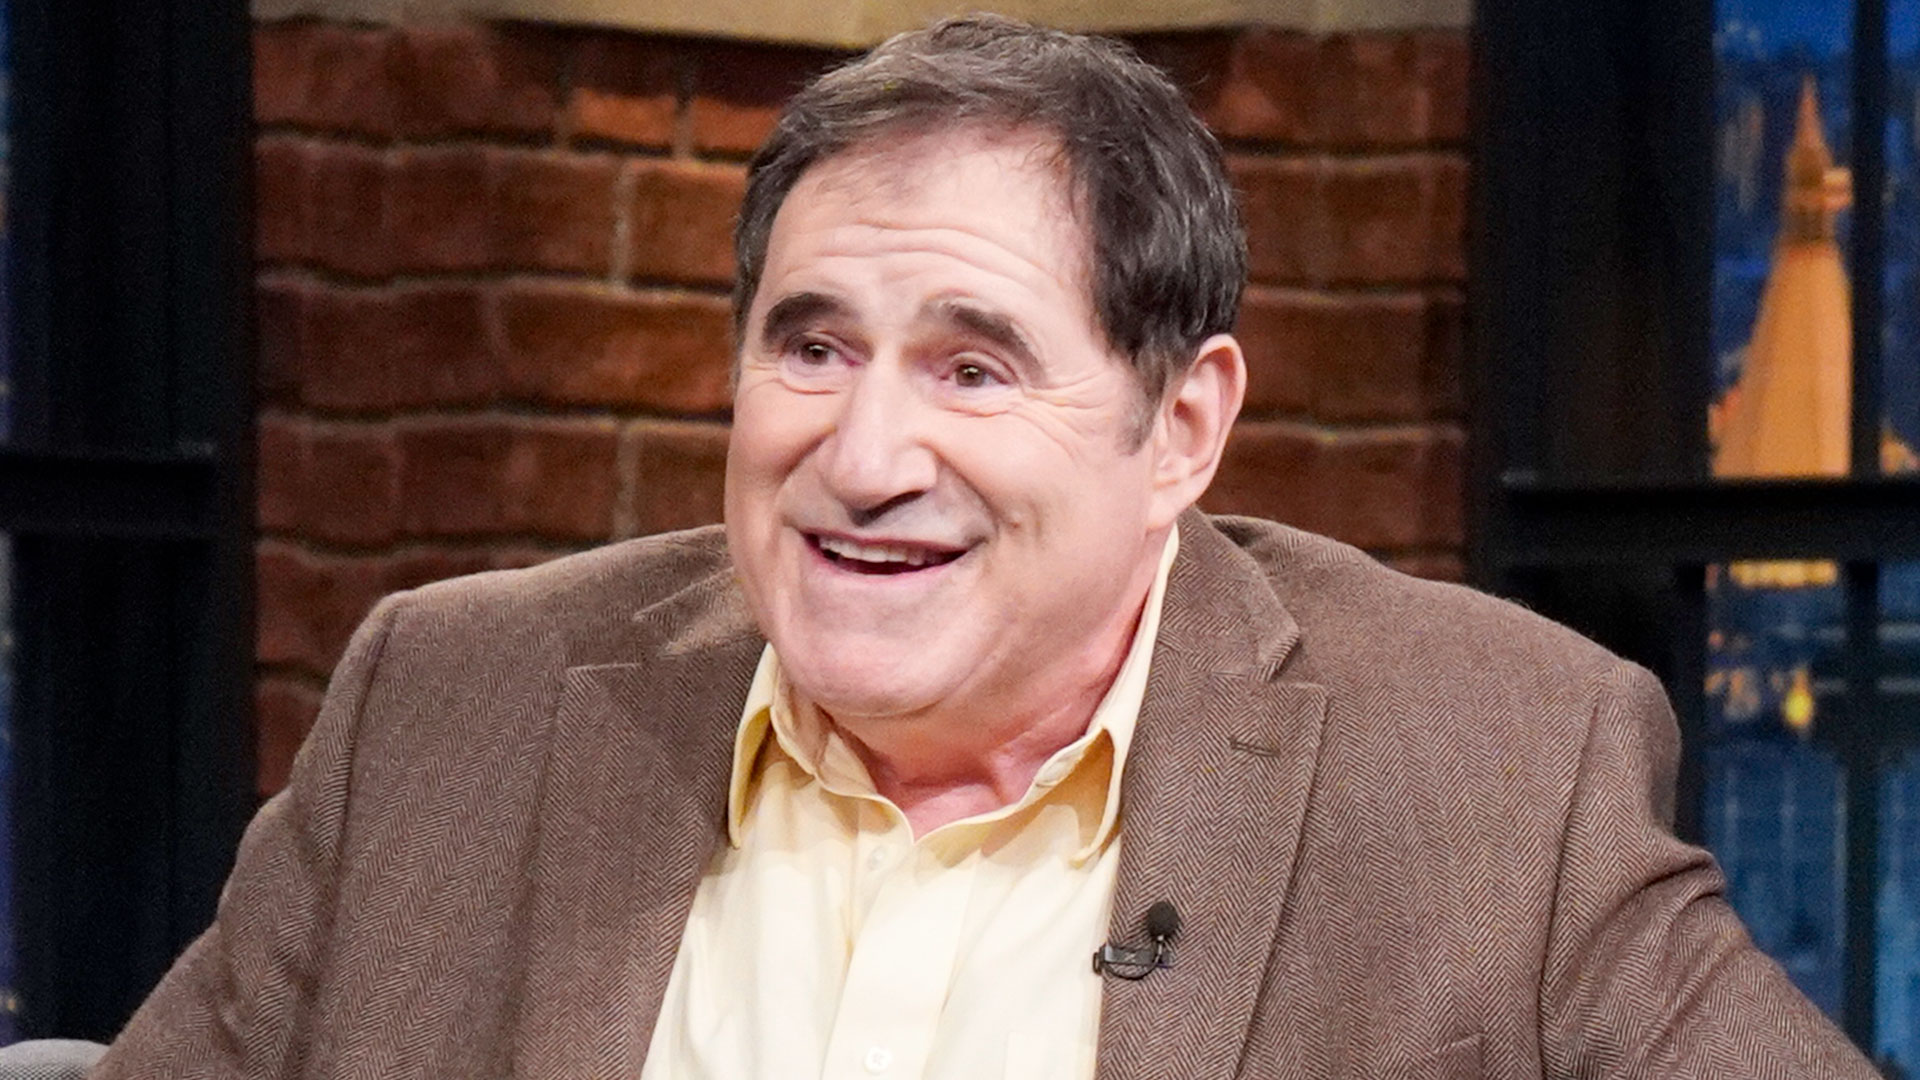 Watch Late Night With Seth Meyers Highlight Richard Kind Got Mistaken For Someone Who Ran An 